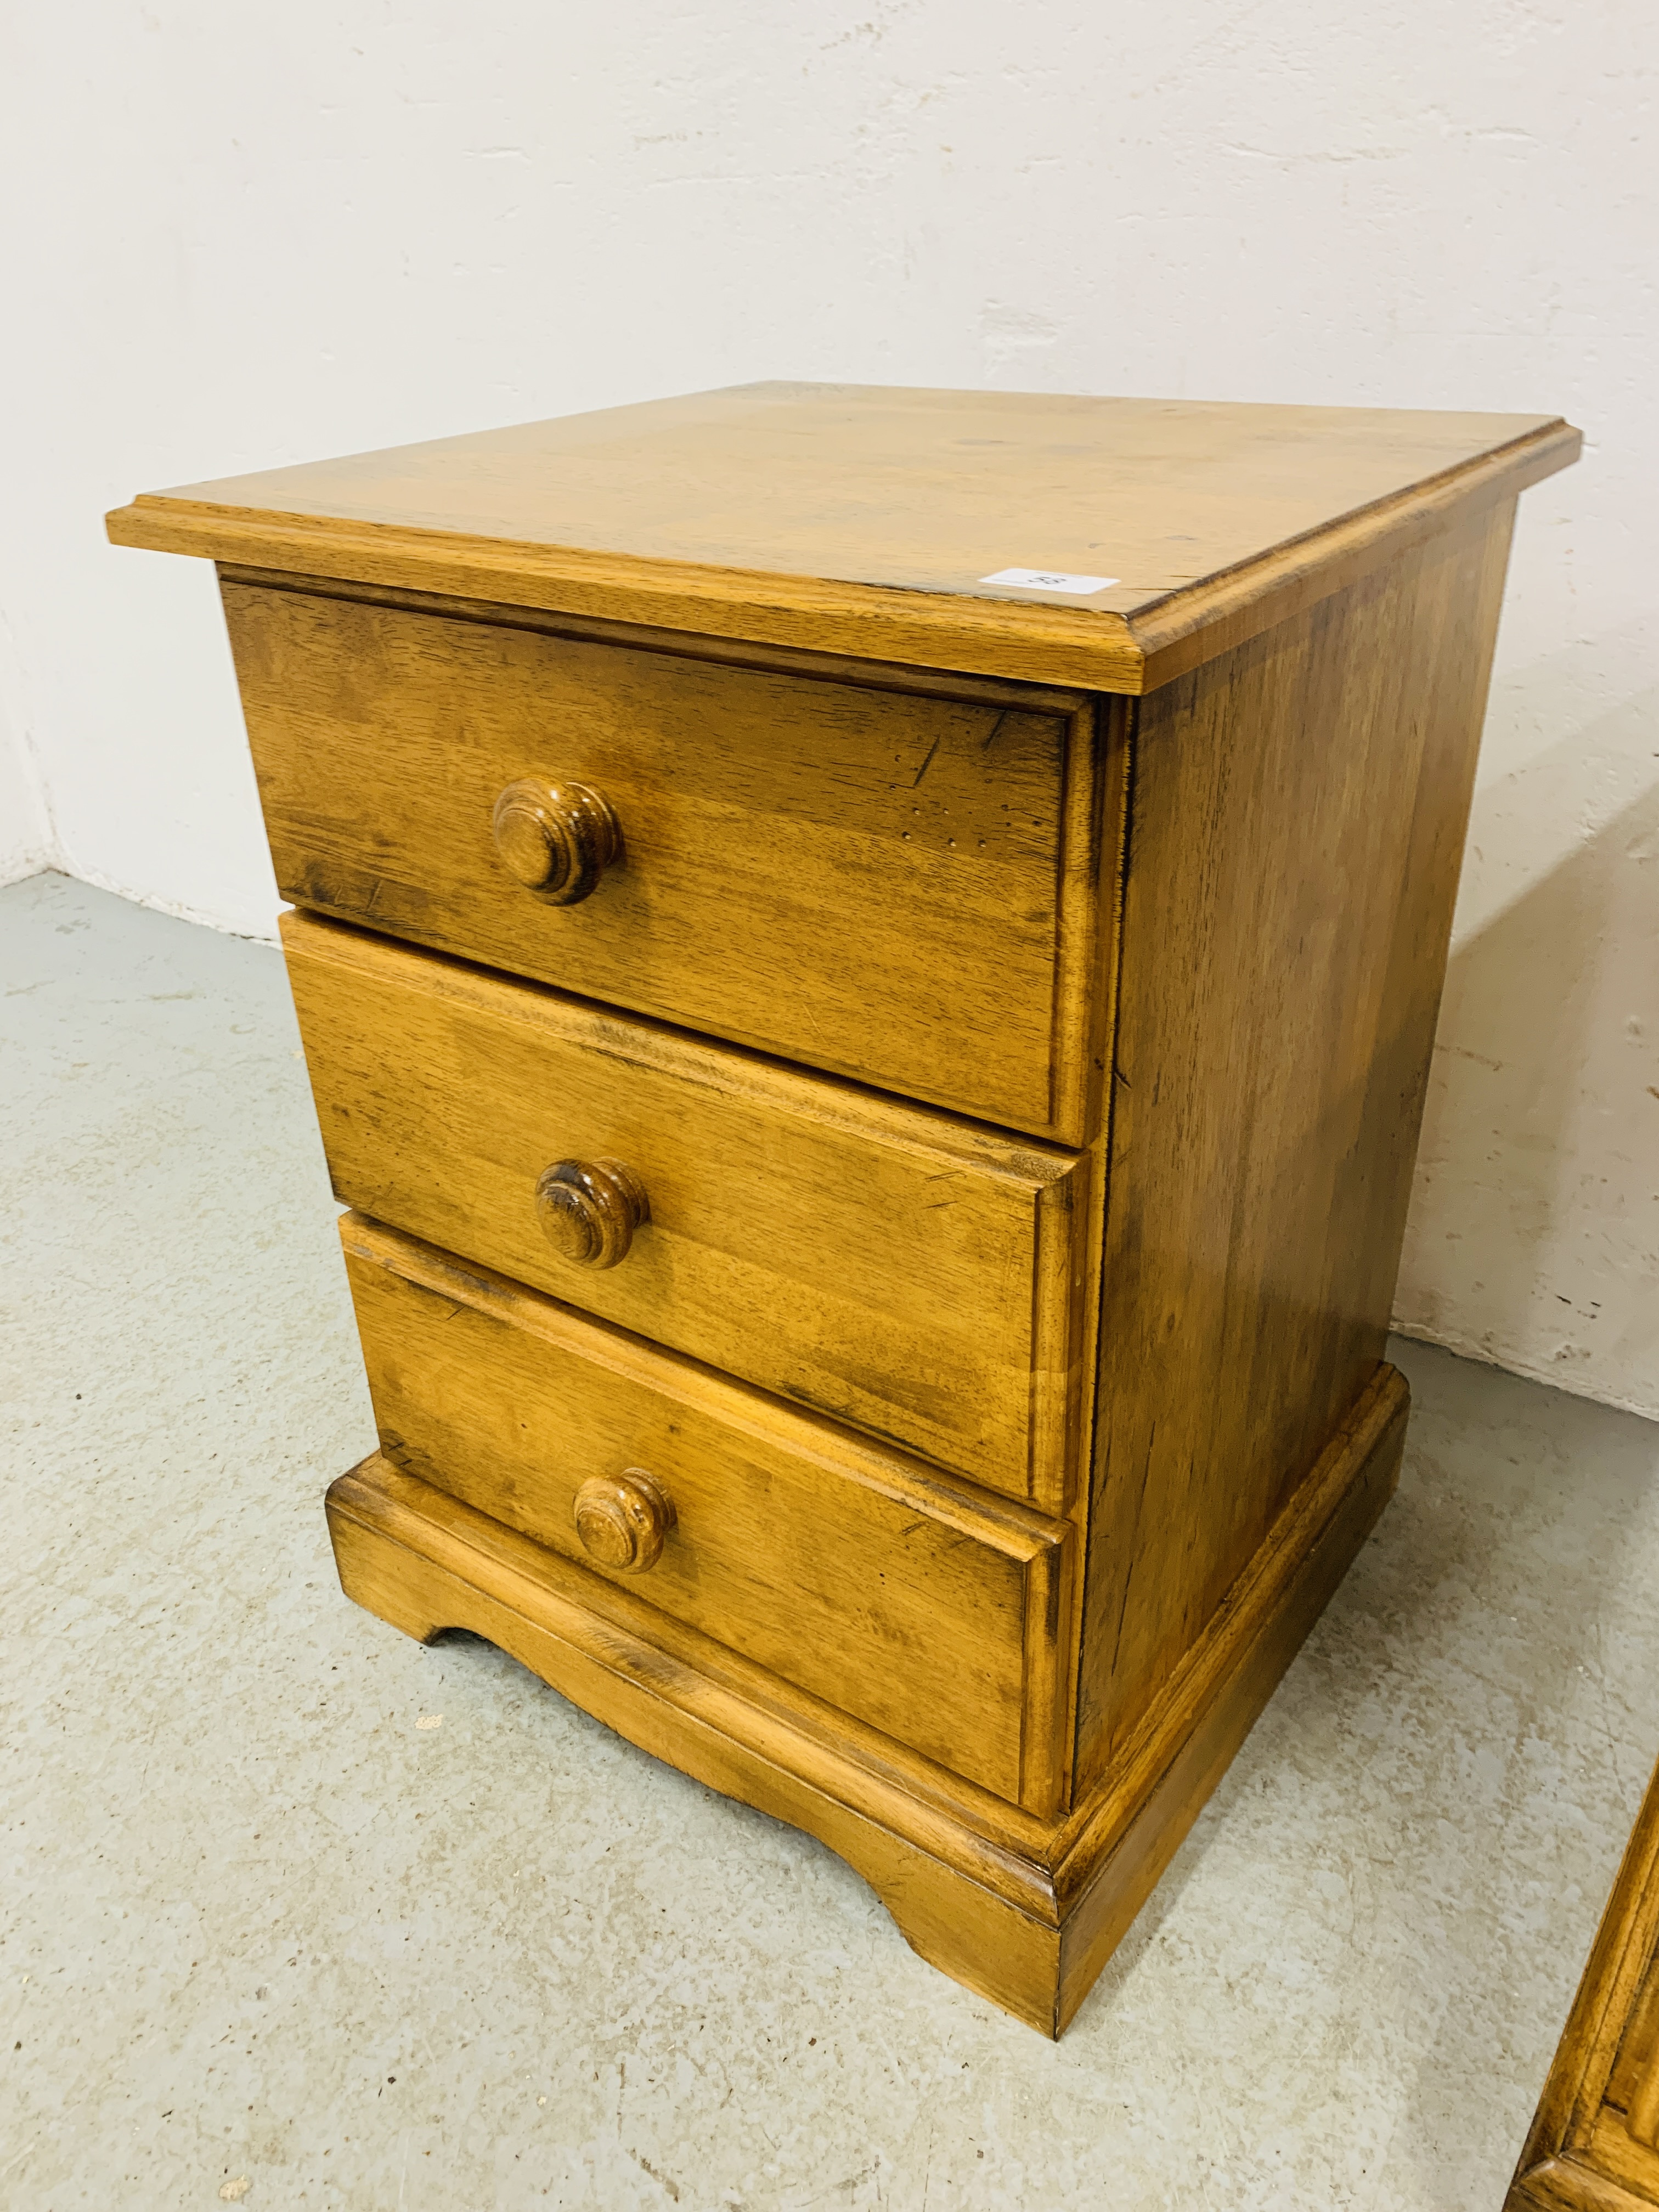 PAIR OF MODERN HARDWOOD 3 DRAWER BEDSIDE CHESTS, WITH TURNED HANDLES - W 49CM. D 46CM. H 63CM. - Image 5 of 6